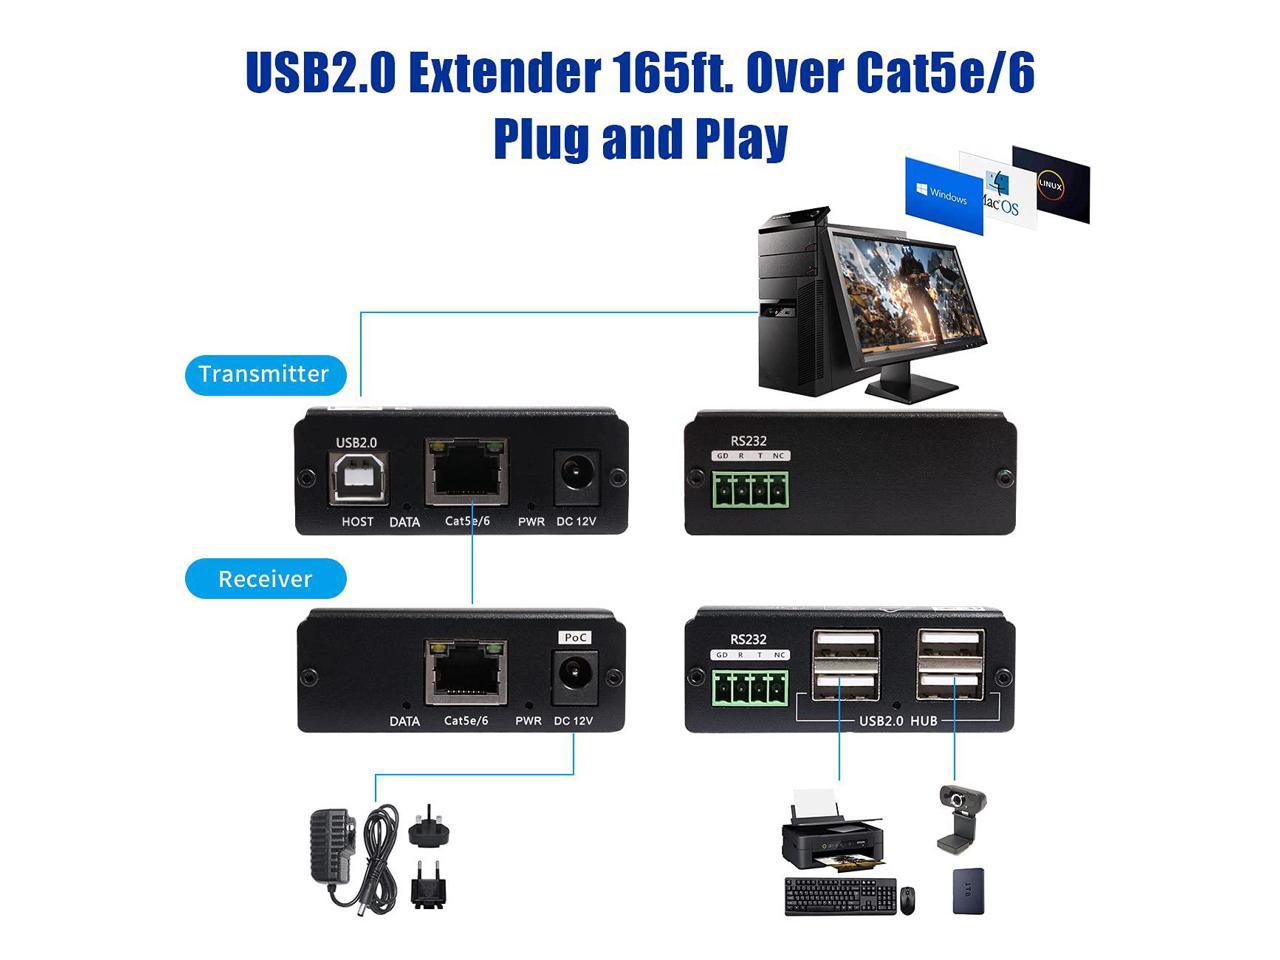 Basicolor Usb Extender Over Cat5e Cat6 262ft 4 Ports Usb2 0 Over Cat5e 6 Extender For Webcam All Usb Devices Usb2 0 To Rj45 Extender With Rs 232 Plug Play No Driver Needed Newegg Com